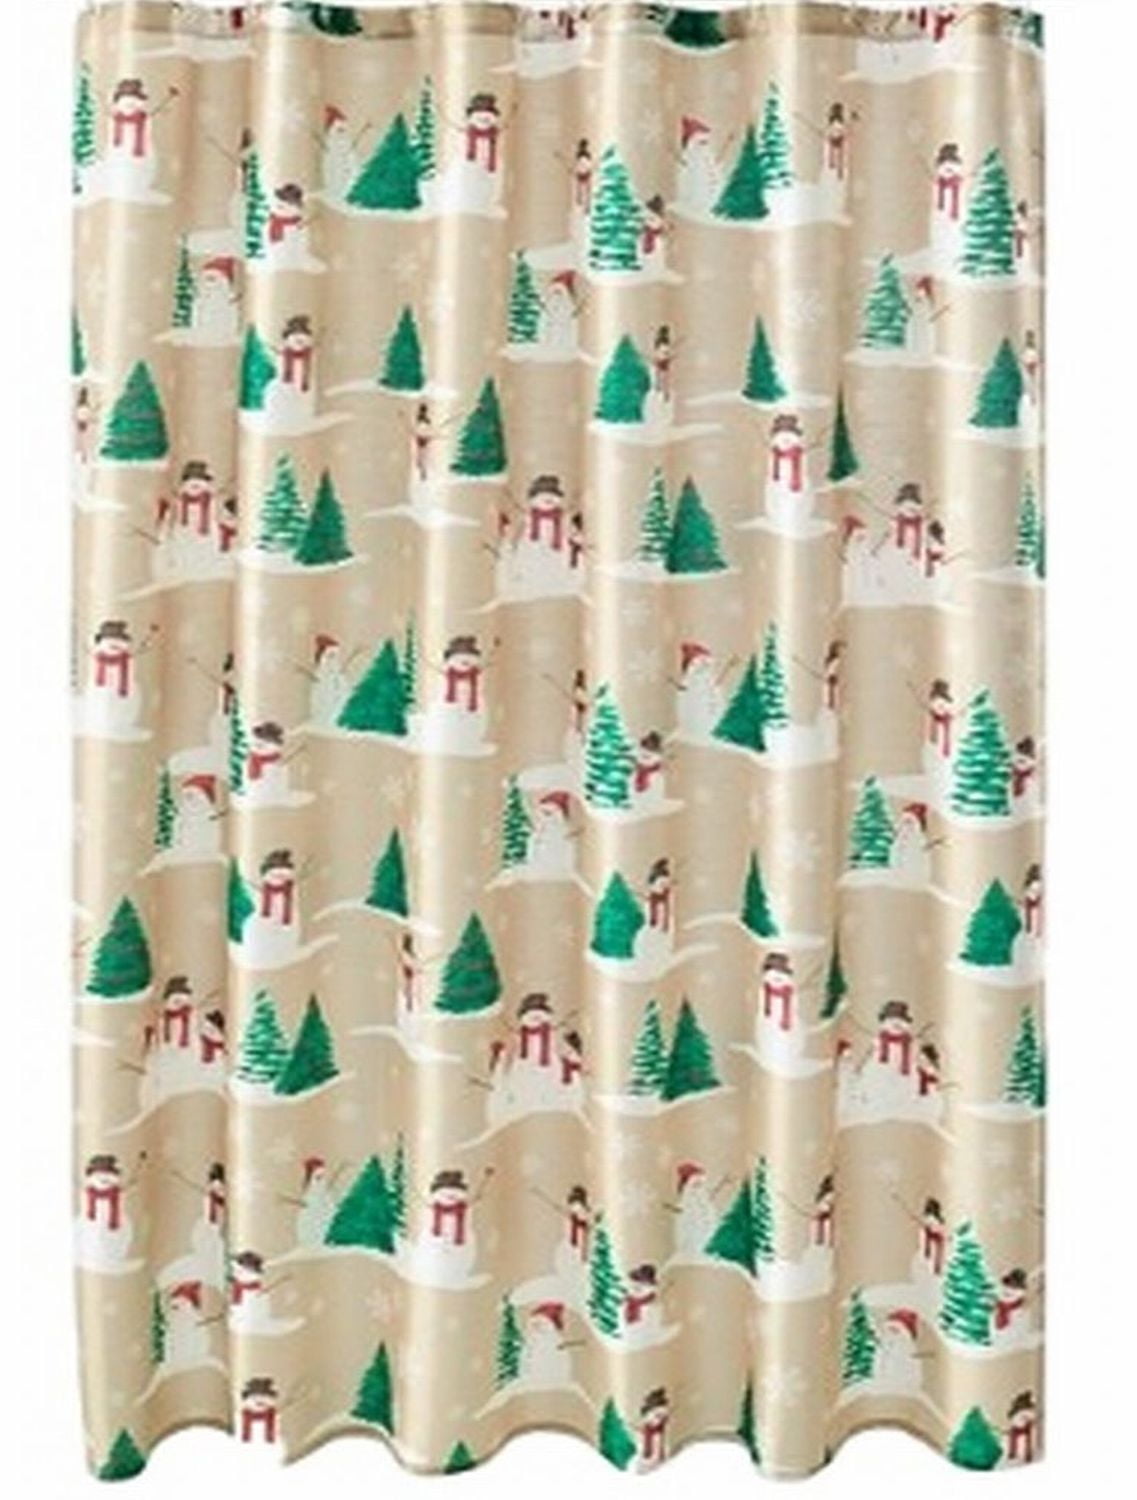 Christmas St Nicholas Square Snowman Frosty Pines Fabric Shower Curtain 70x70 